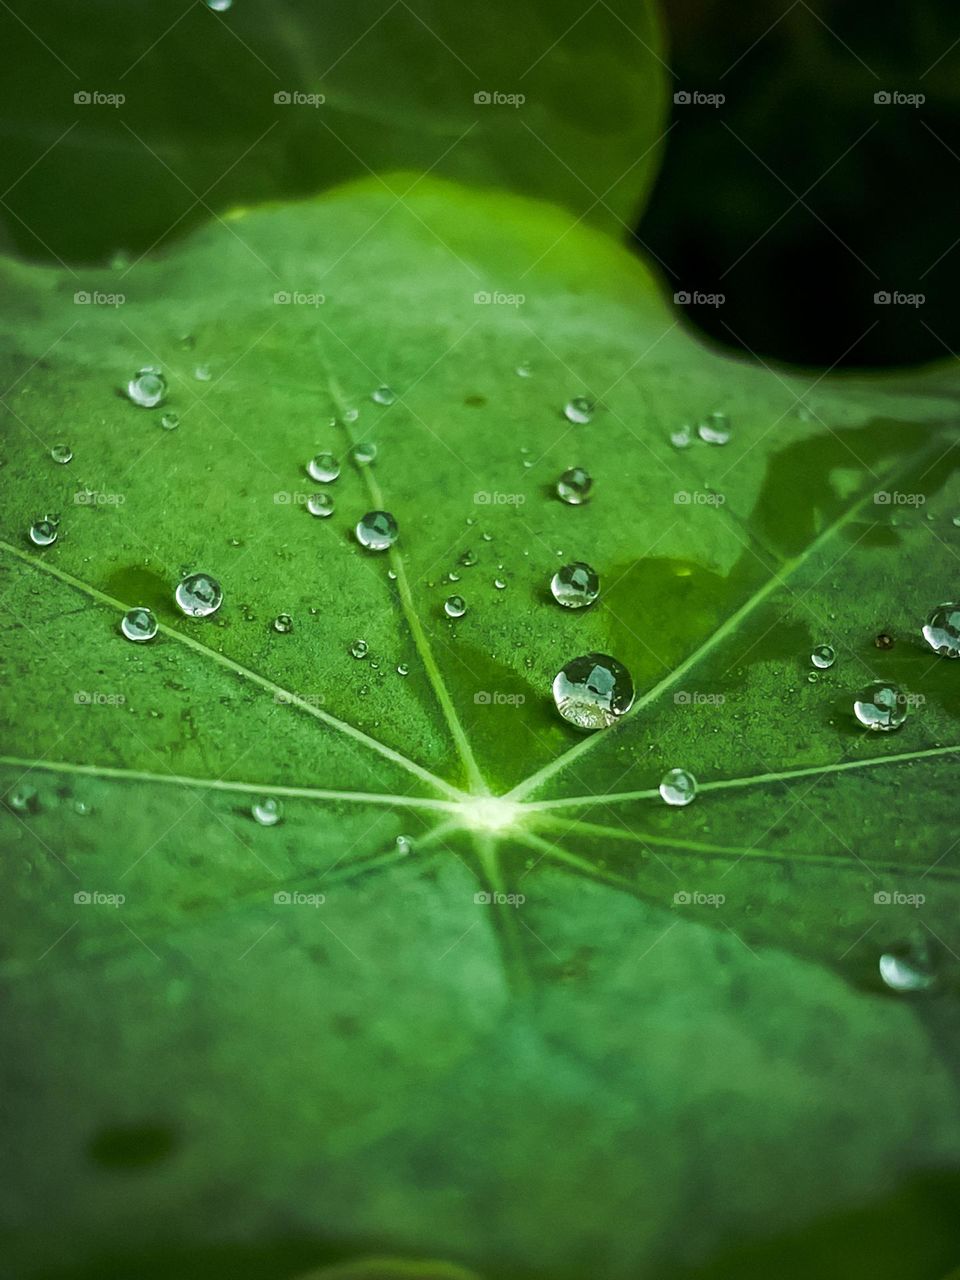 Water drops droplets leaf pellet center rainfall nature outdoors phone photo photography no people green